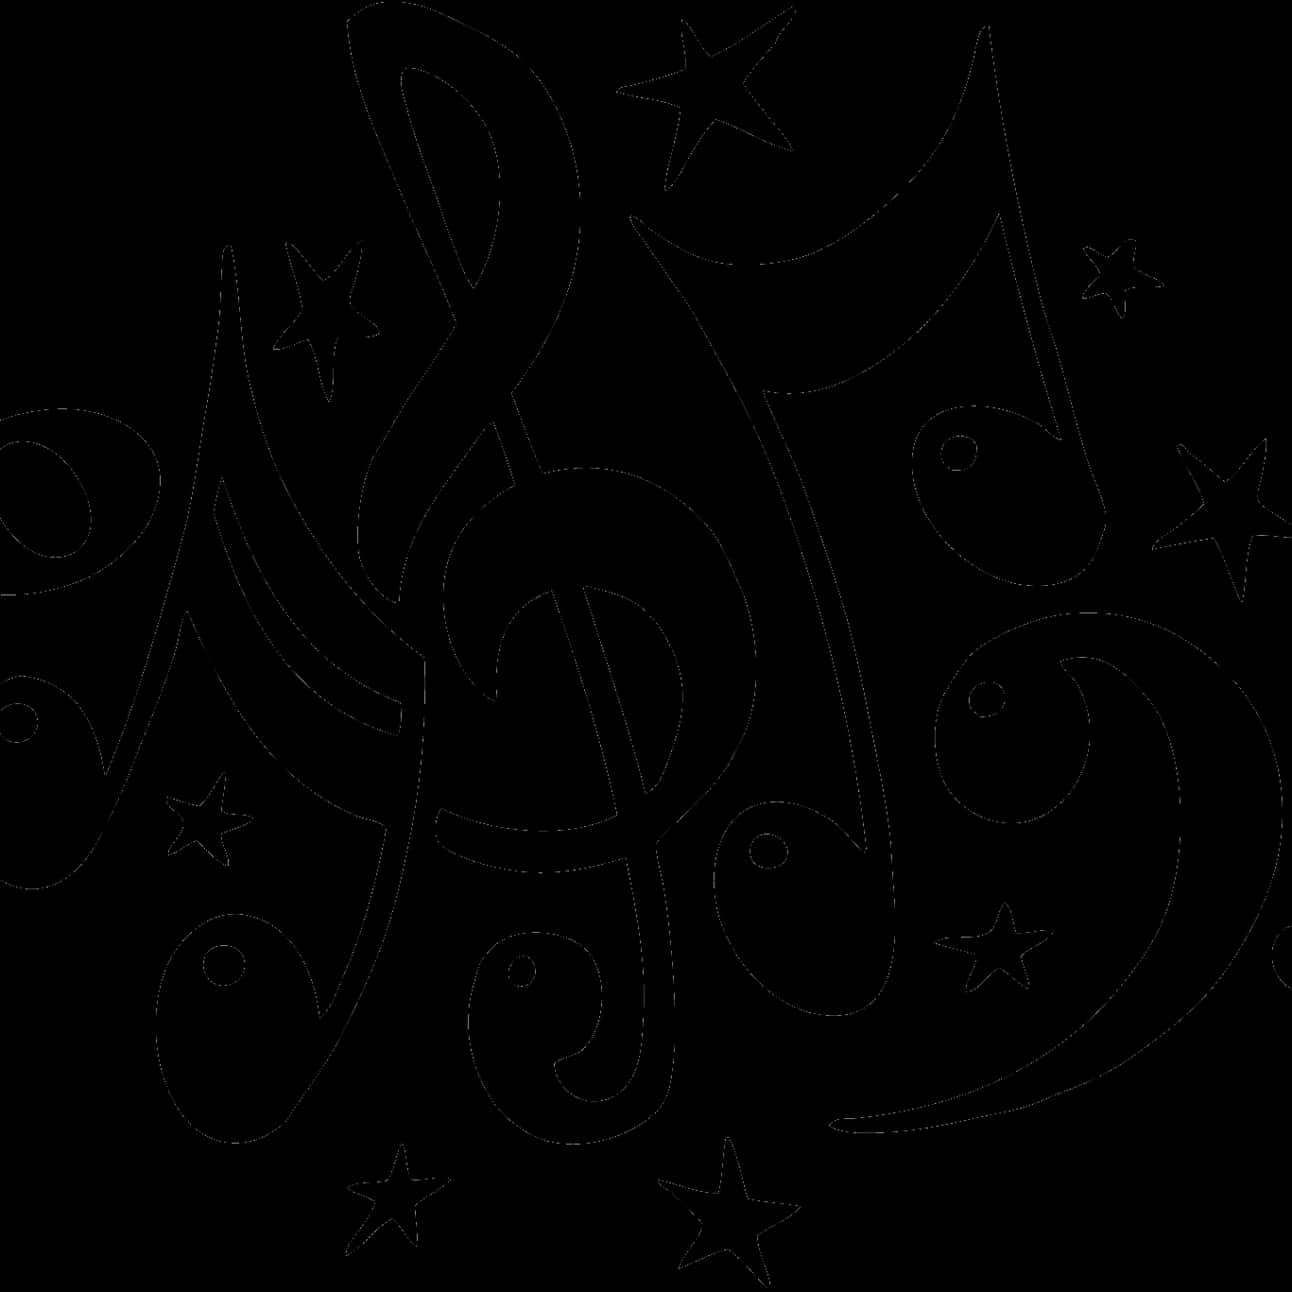 A Black And White Image Of A Musical Note